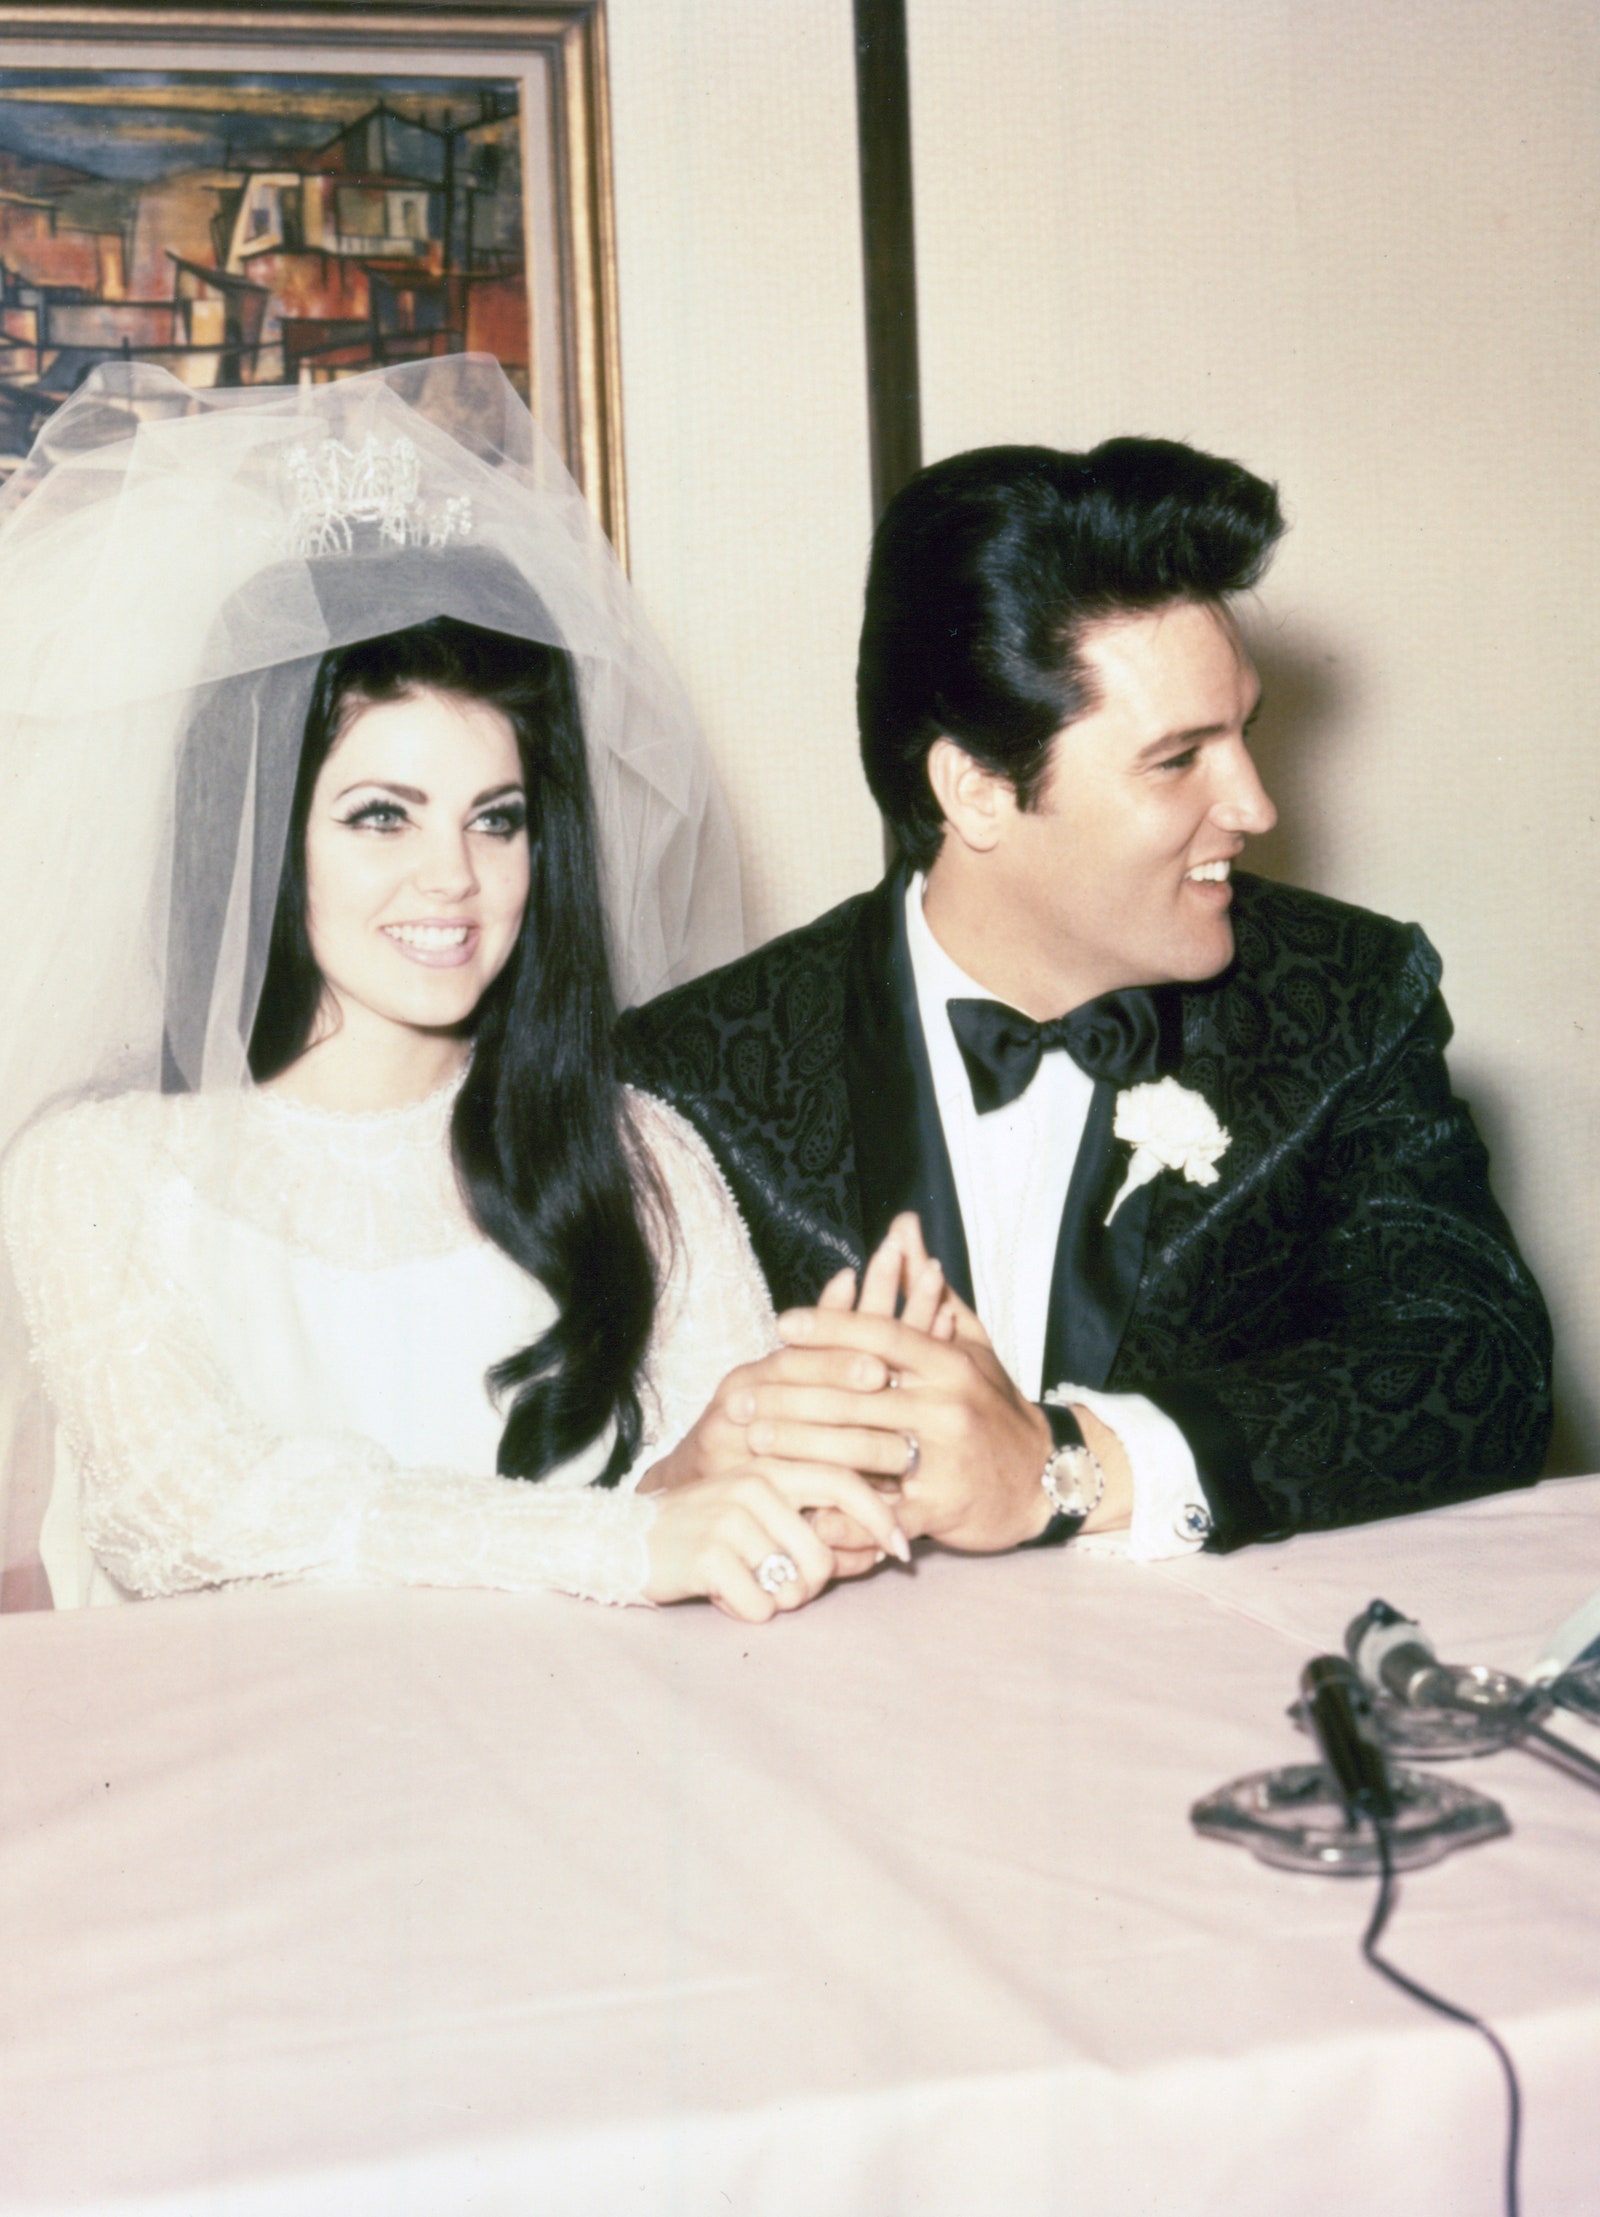 Elvis and Priscilla Presley on their wedding day in 1967.